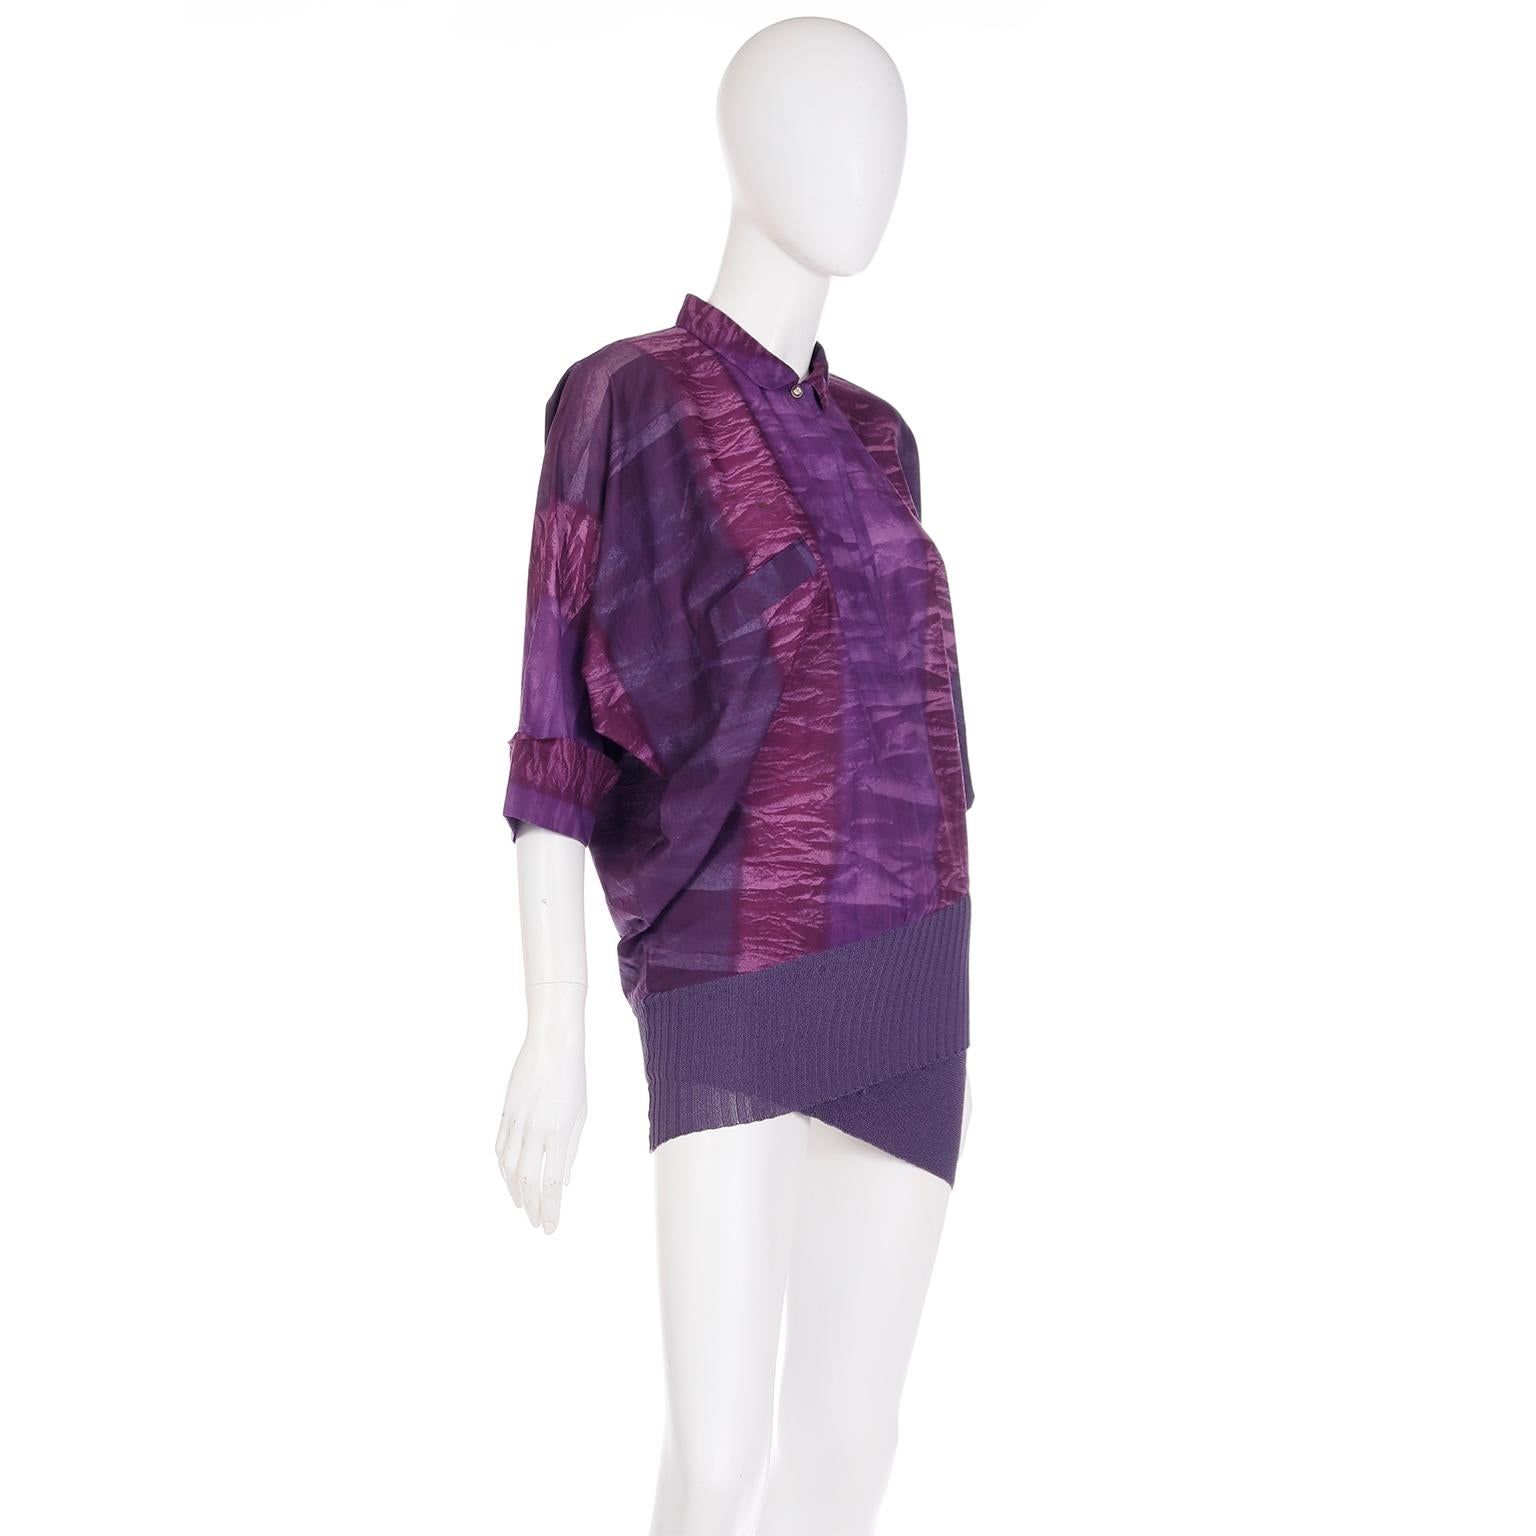 Gianni Versace 1980s Asymmetrical Top Purple Abstract Print Shirt w Knit Trim In Excellent Condition For Sale In Portland, OR